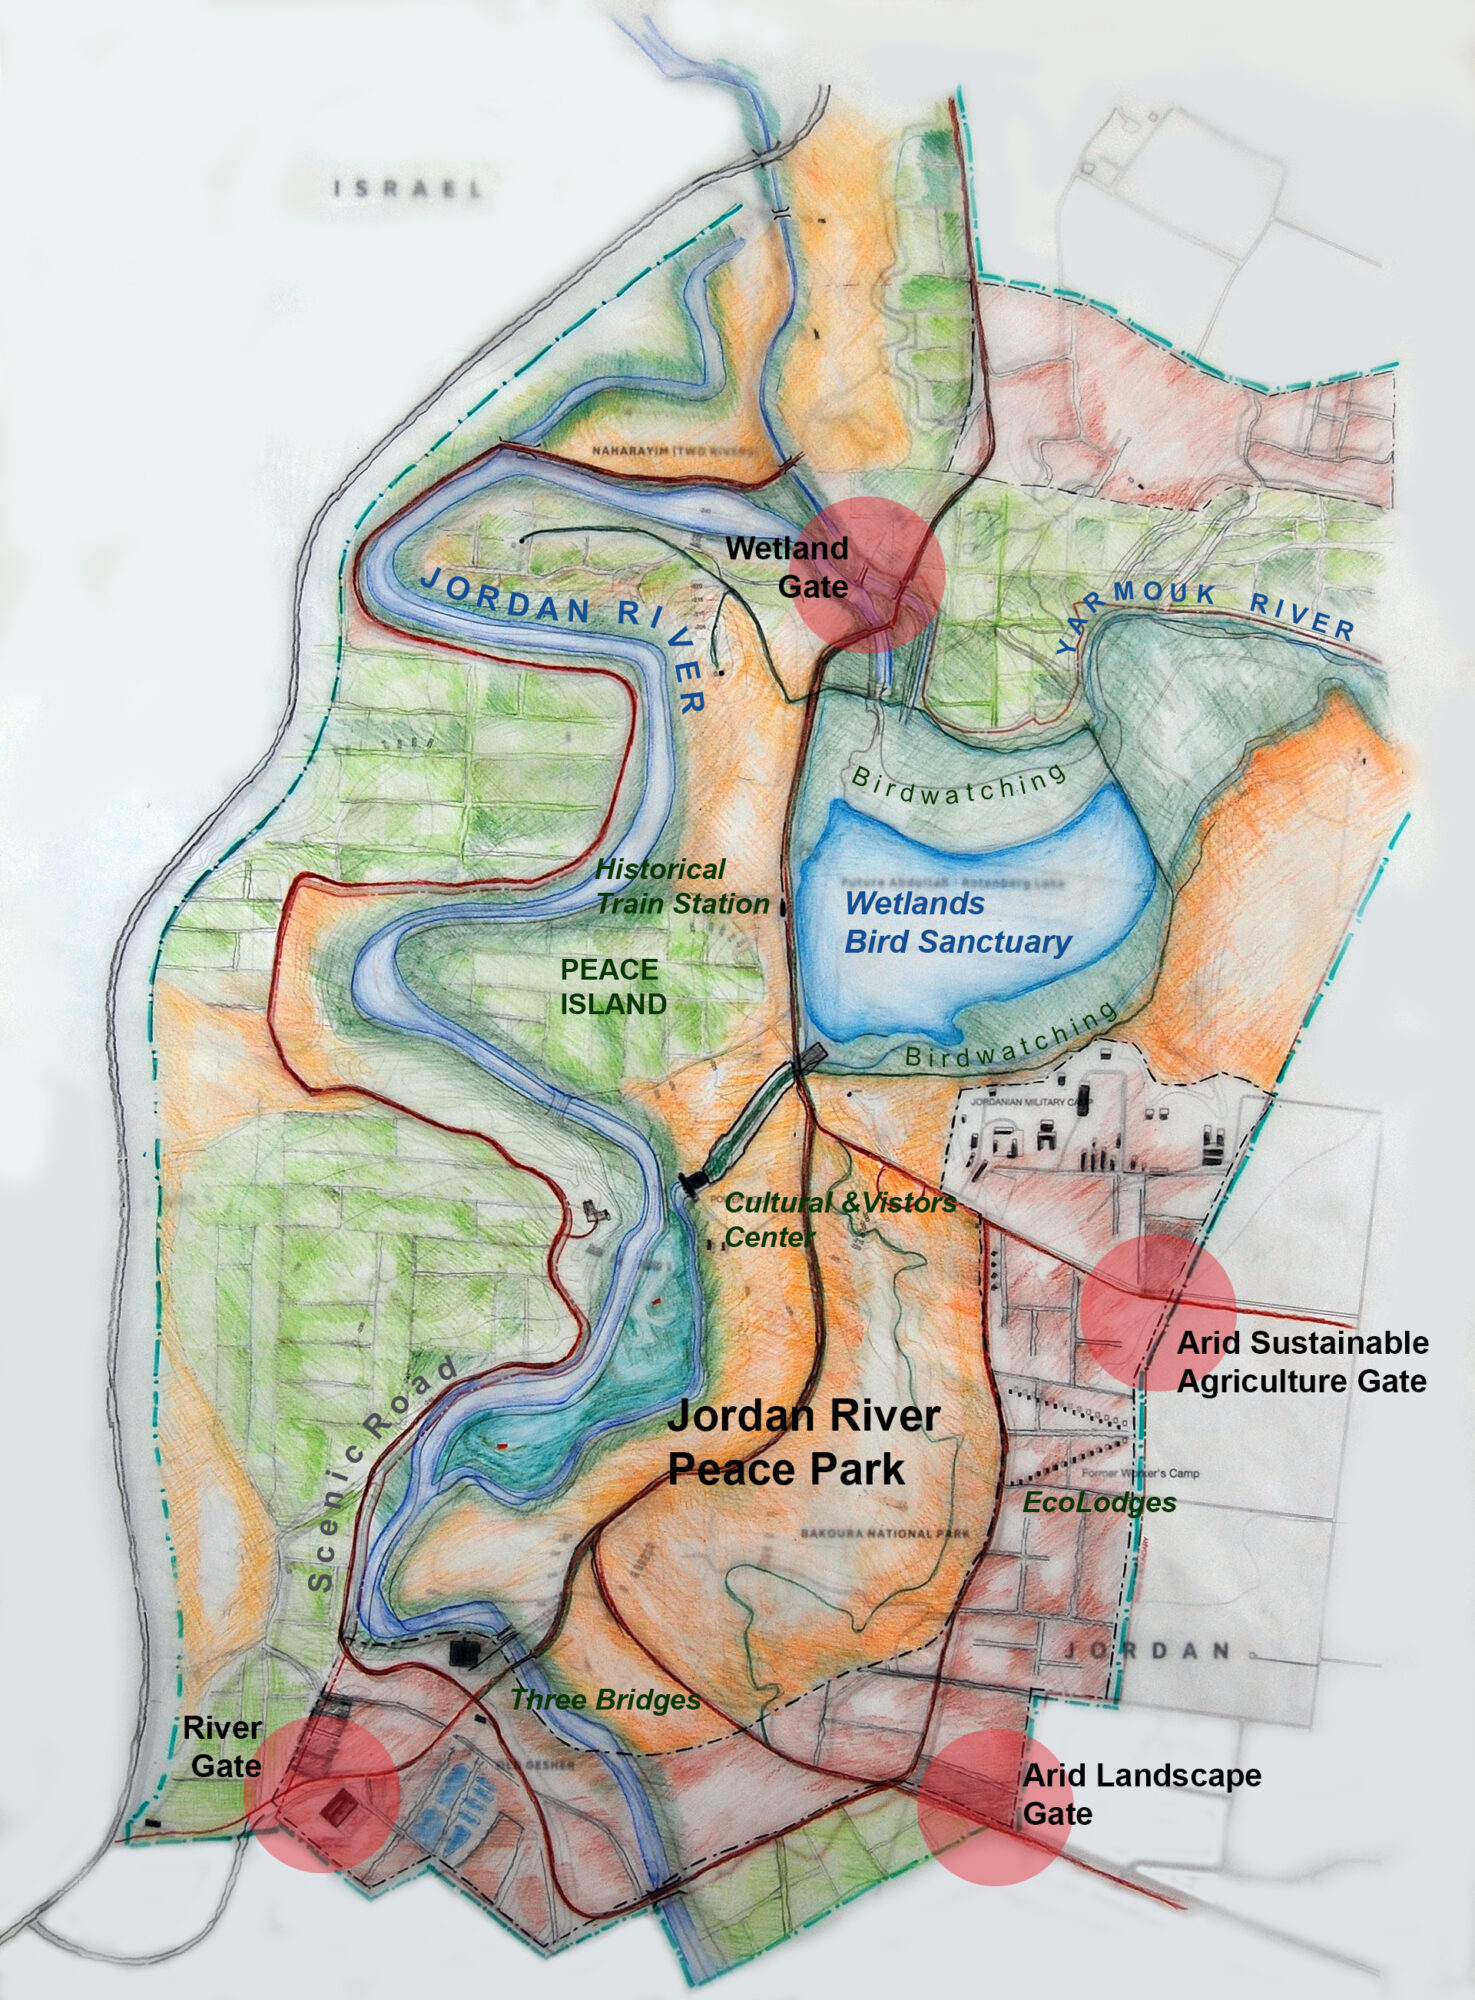 A sketch with green, orange, blue and red sections highlighting different parts of the landscape across the border between Jordan and Israel.